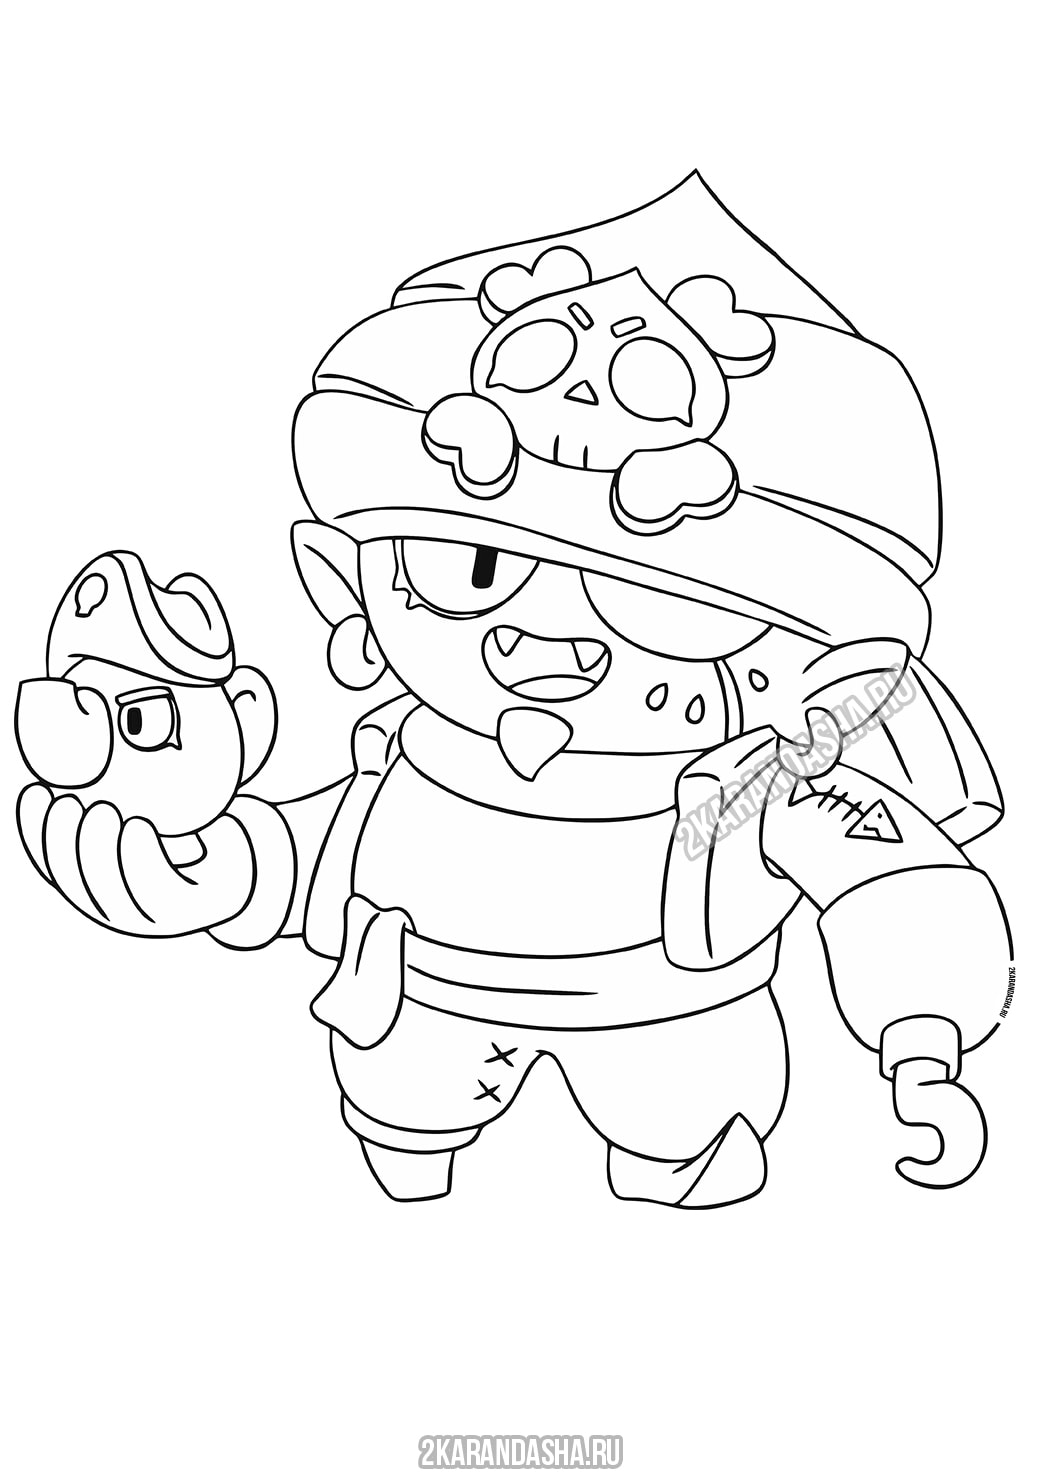 Coloring Page Brawl Stars Genie Pirate With Lamp Print Brawl Stars - brawl stars genuie